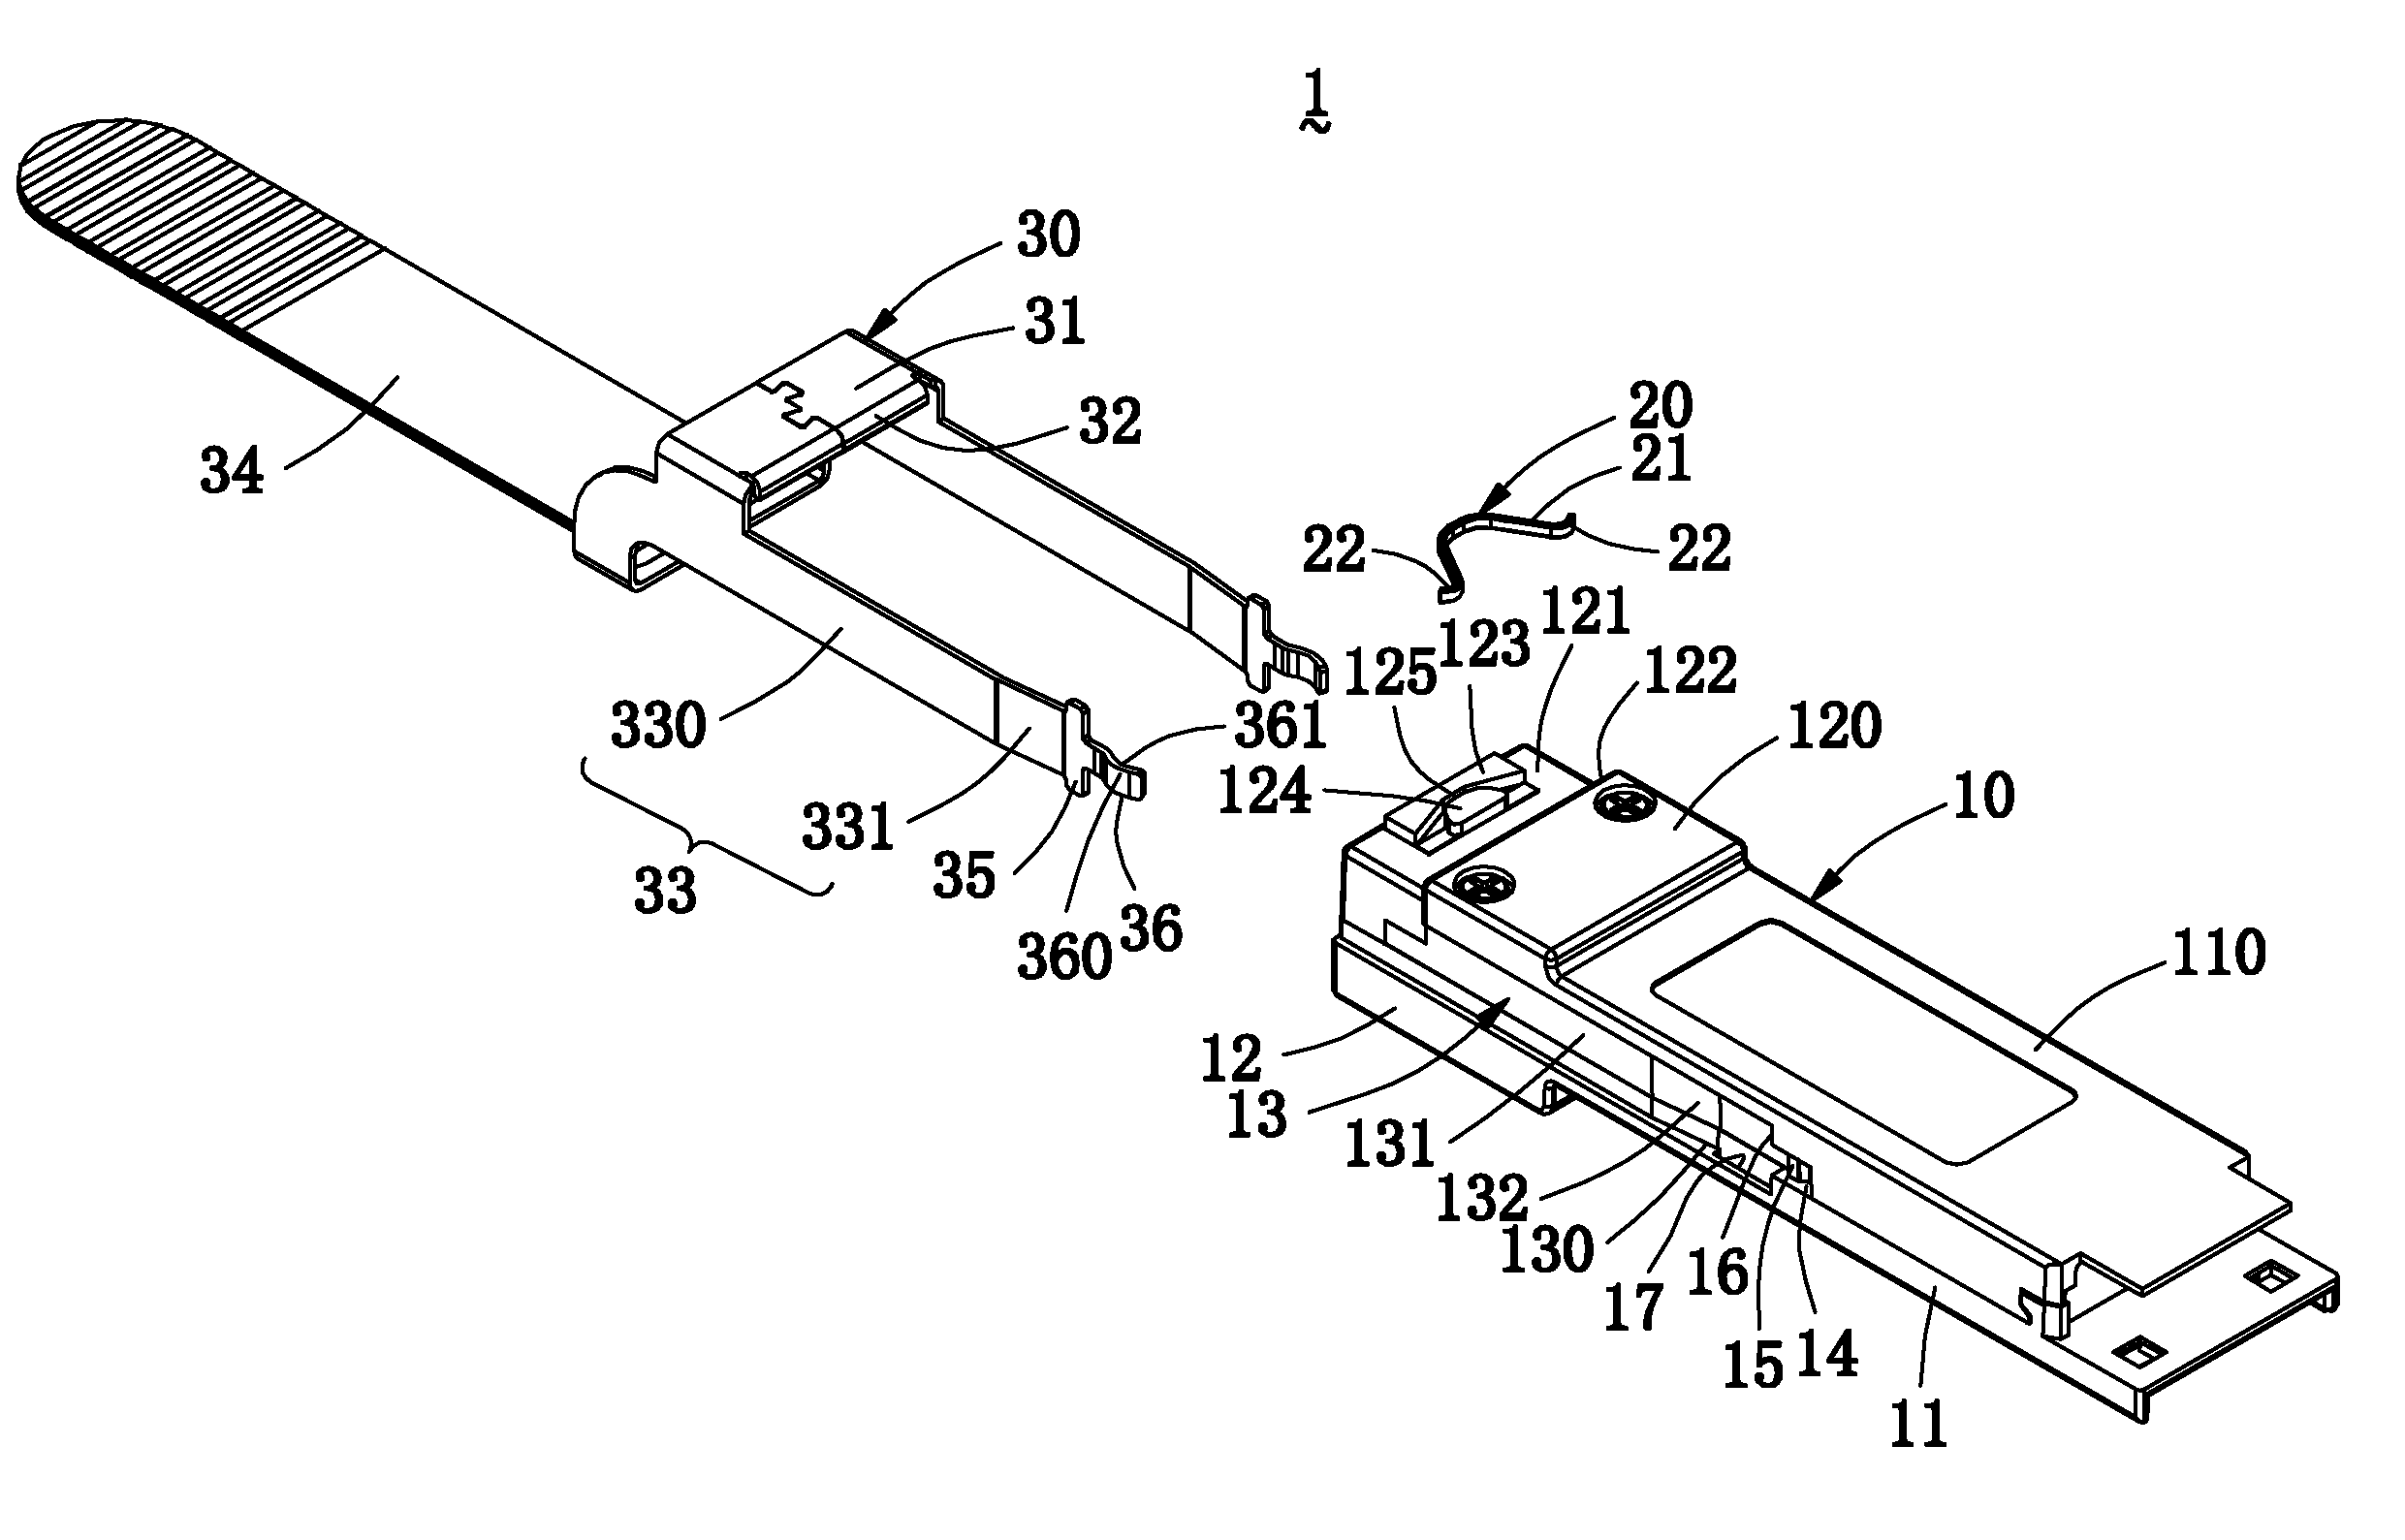 Connector with a locking and unlocking mechanism